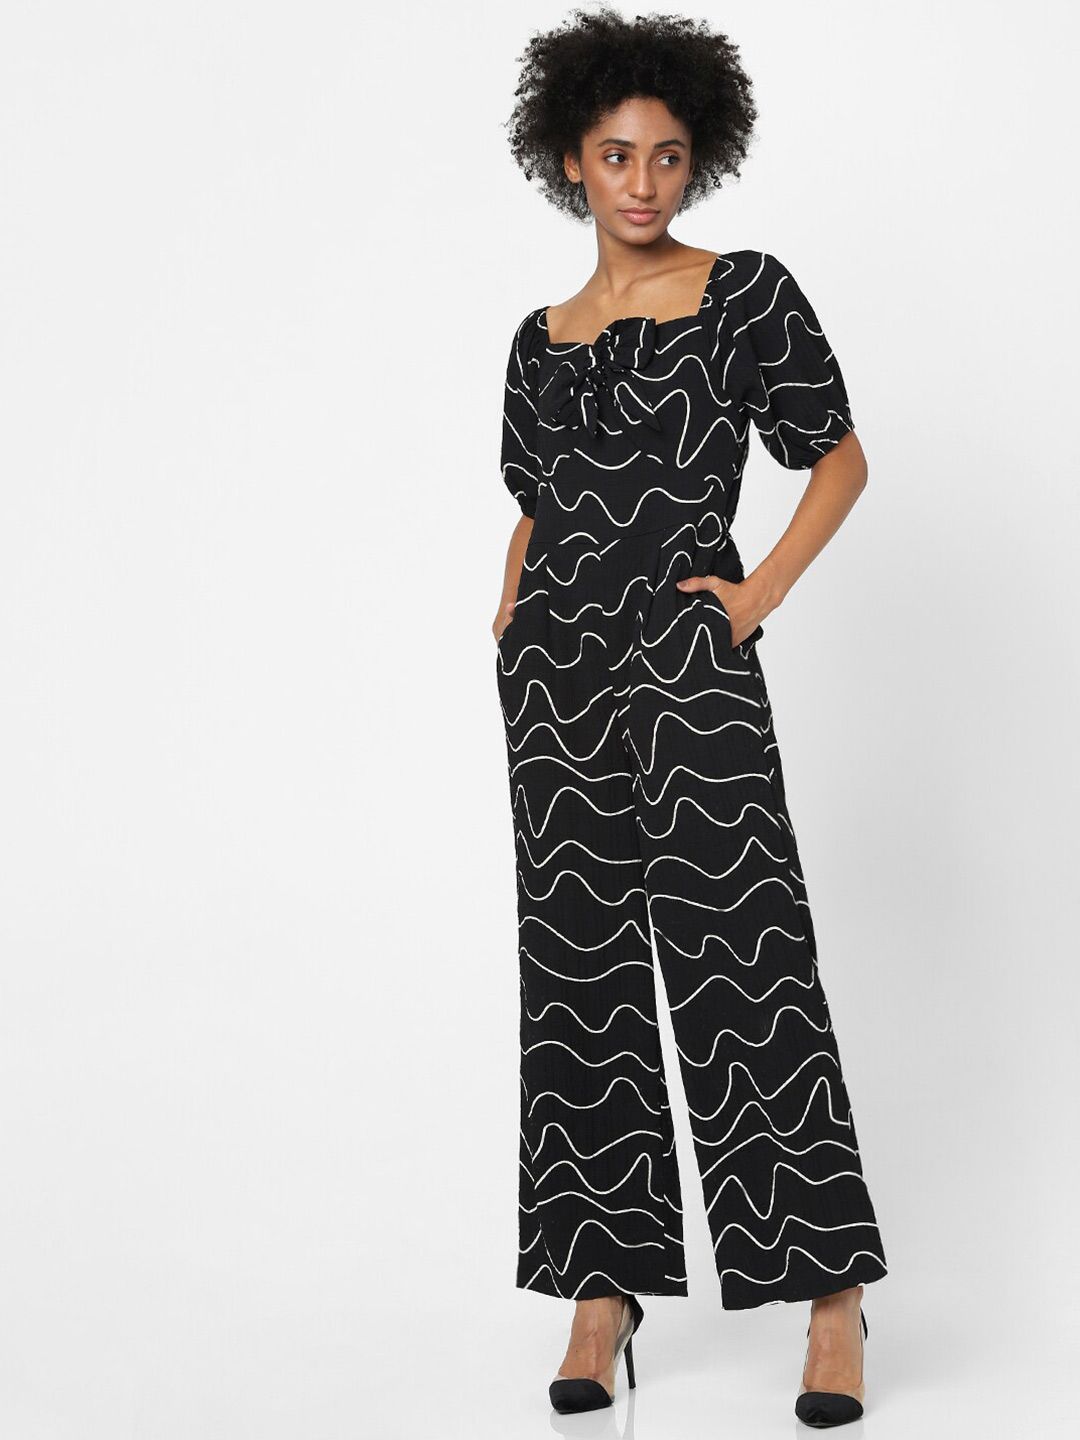 ONLY Women Black & White Printed Square Neck Basic Jumpsuit Price in India